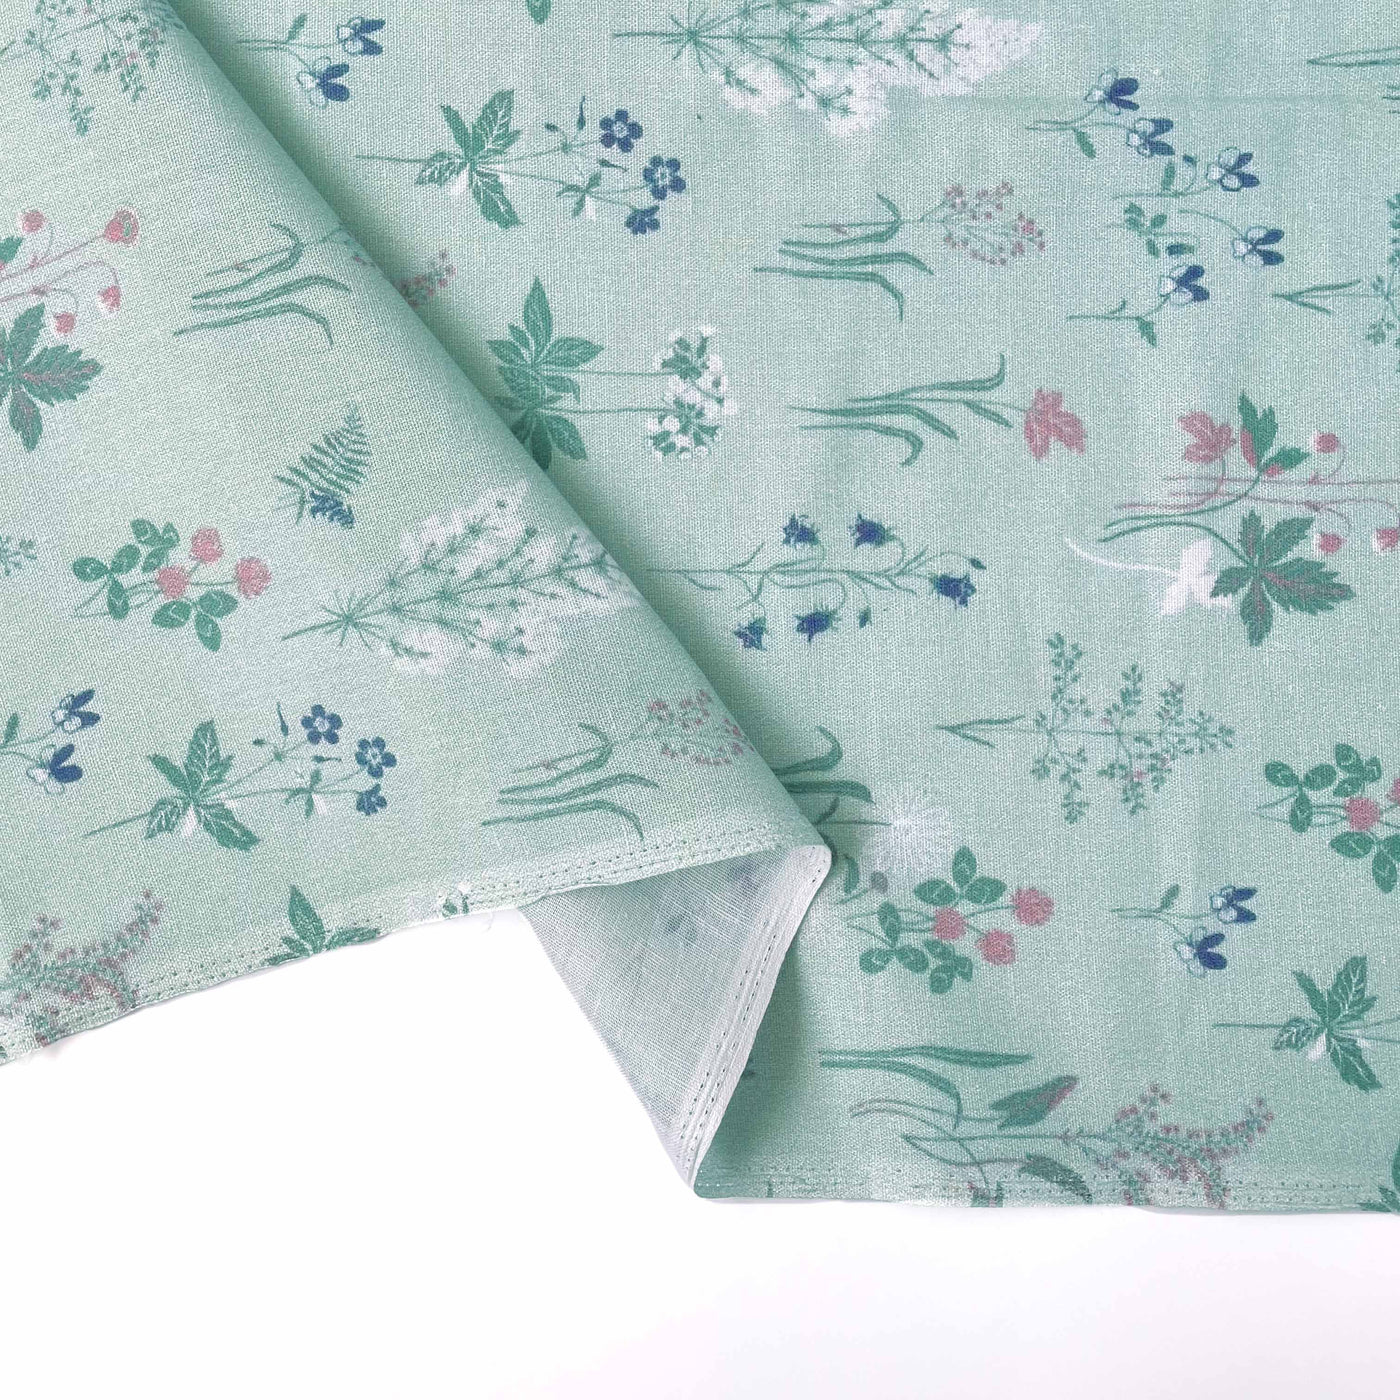 Printed Cotton Linen Fabric Cut Piece (CUT PIECE) Dusty Mint Green Timeless Botanicals Printed Pure Cotton Linen Fabric (Width 44 Inches)